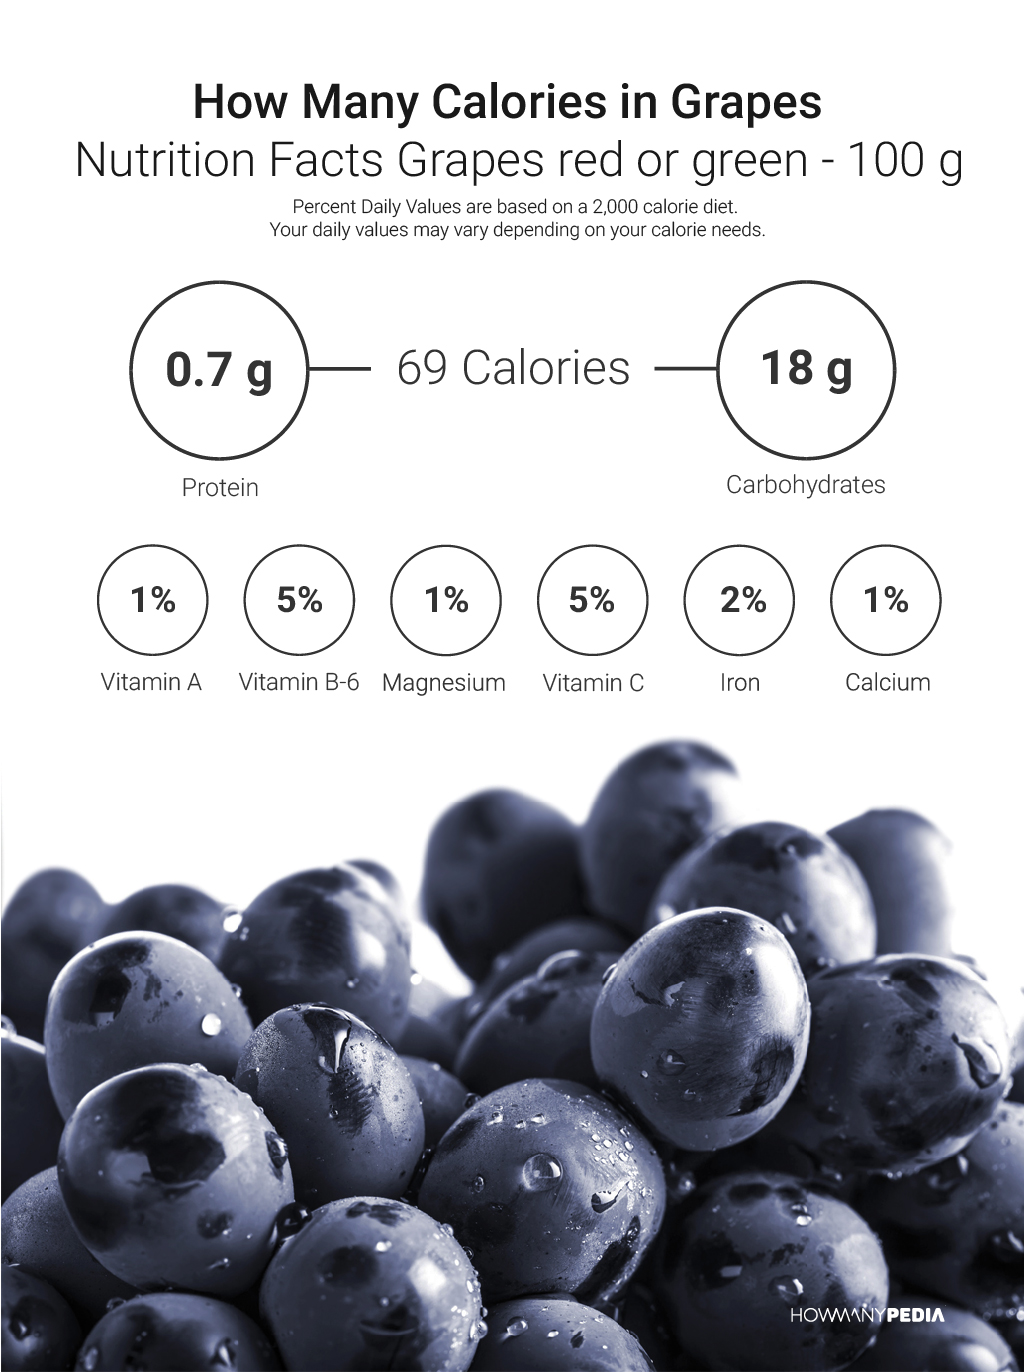 How Many Calories in Grapes Nutrition Facts